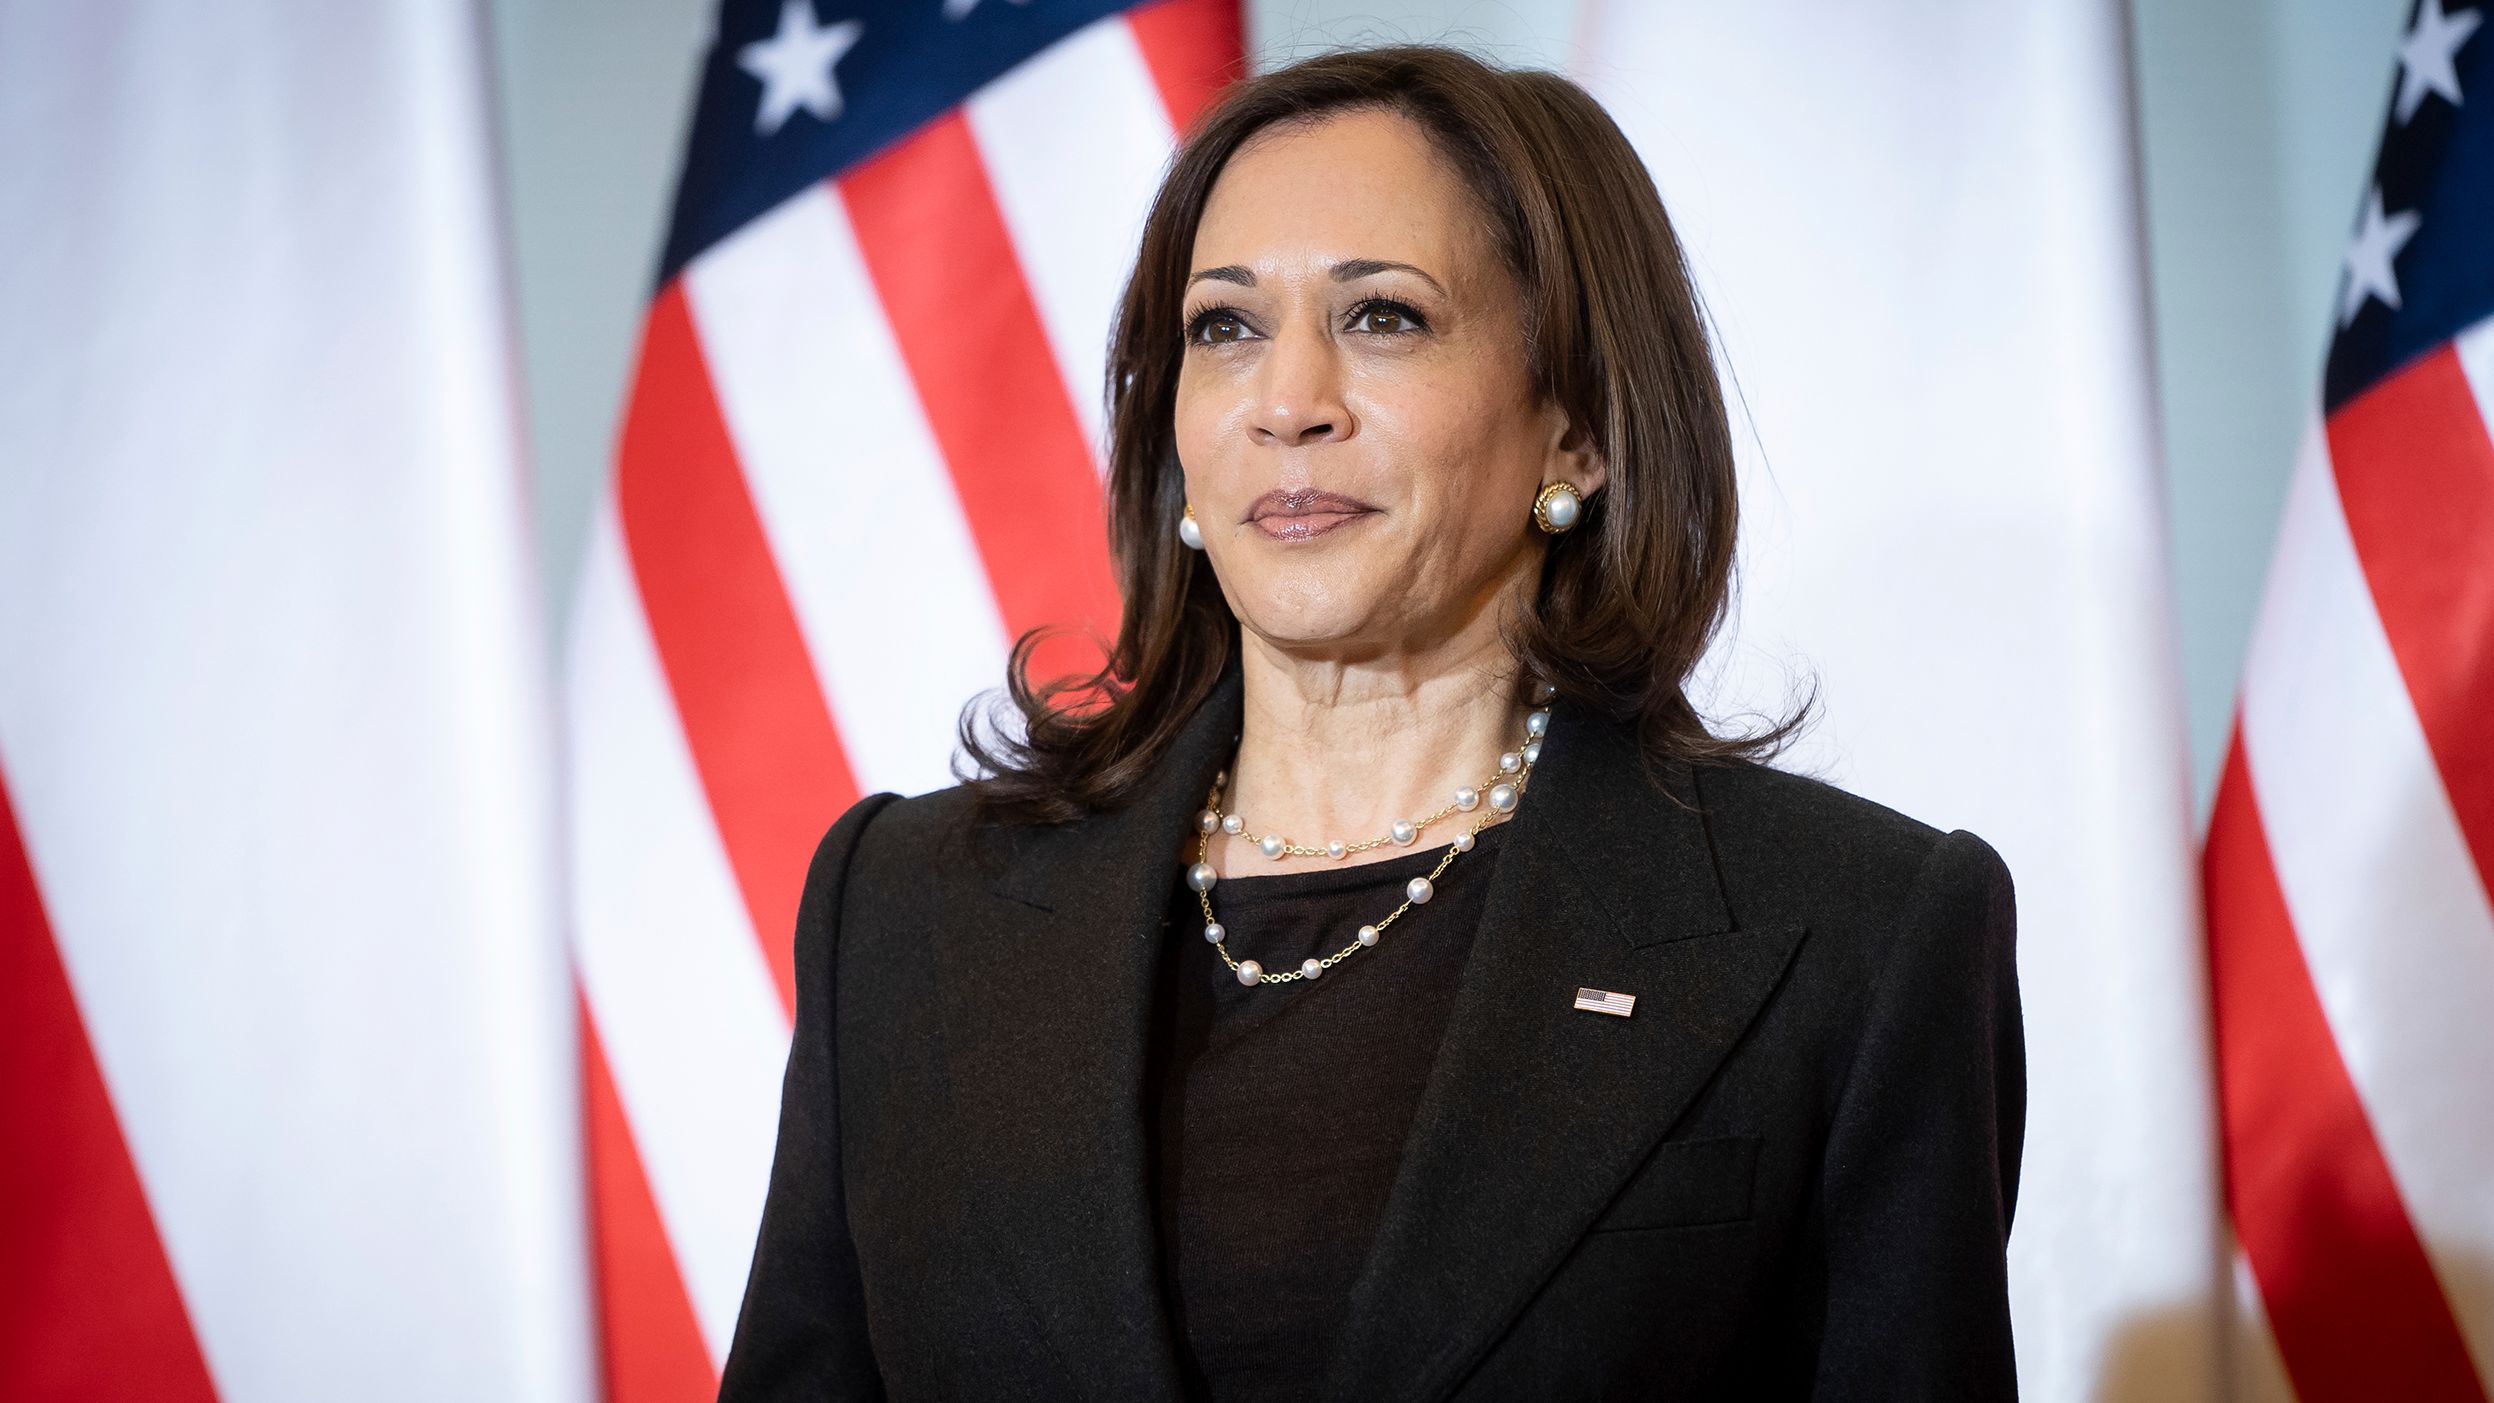 US Vice President Kamala Harris in Warsaw, Poland, on March 10, 2022.